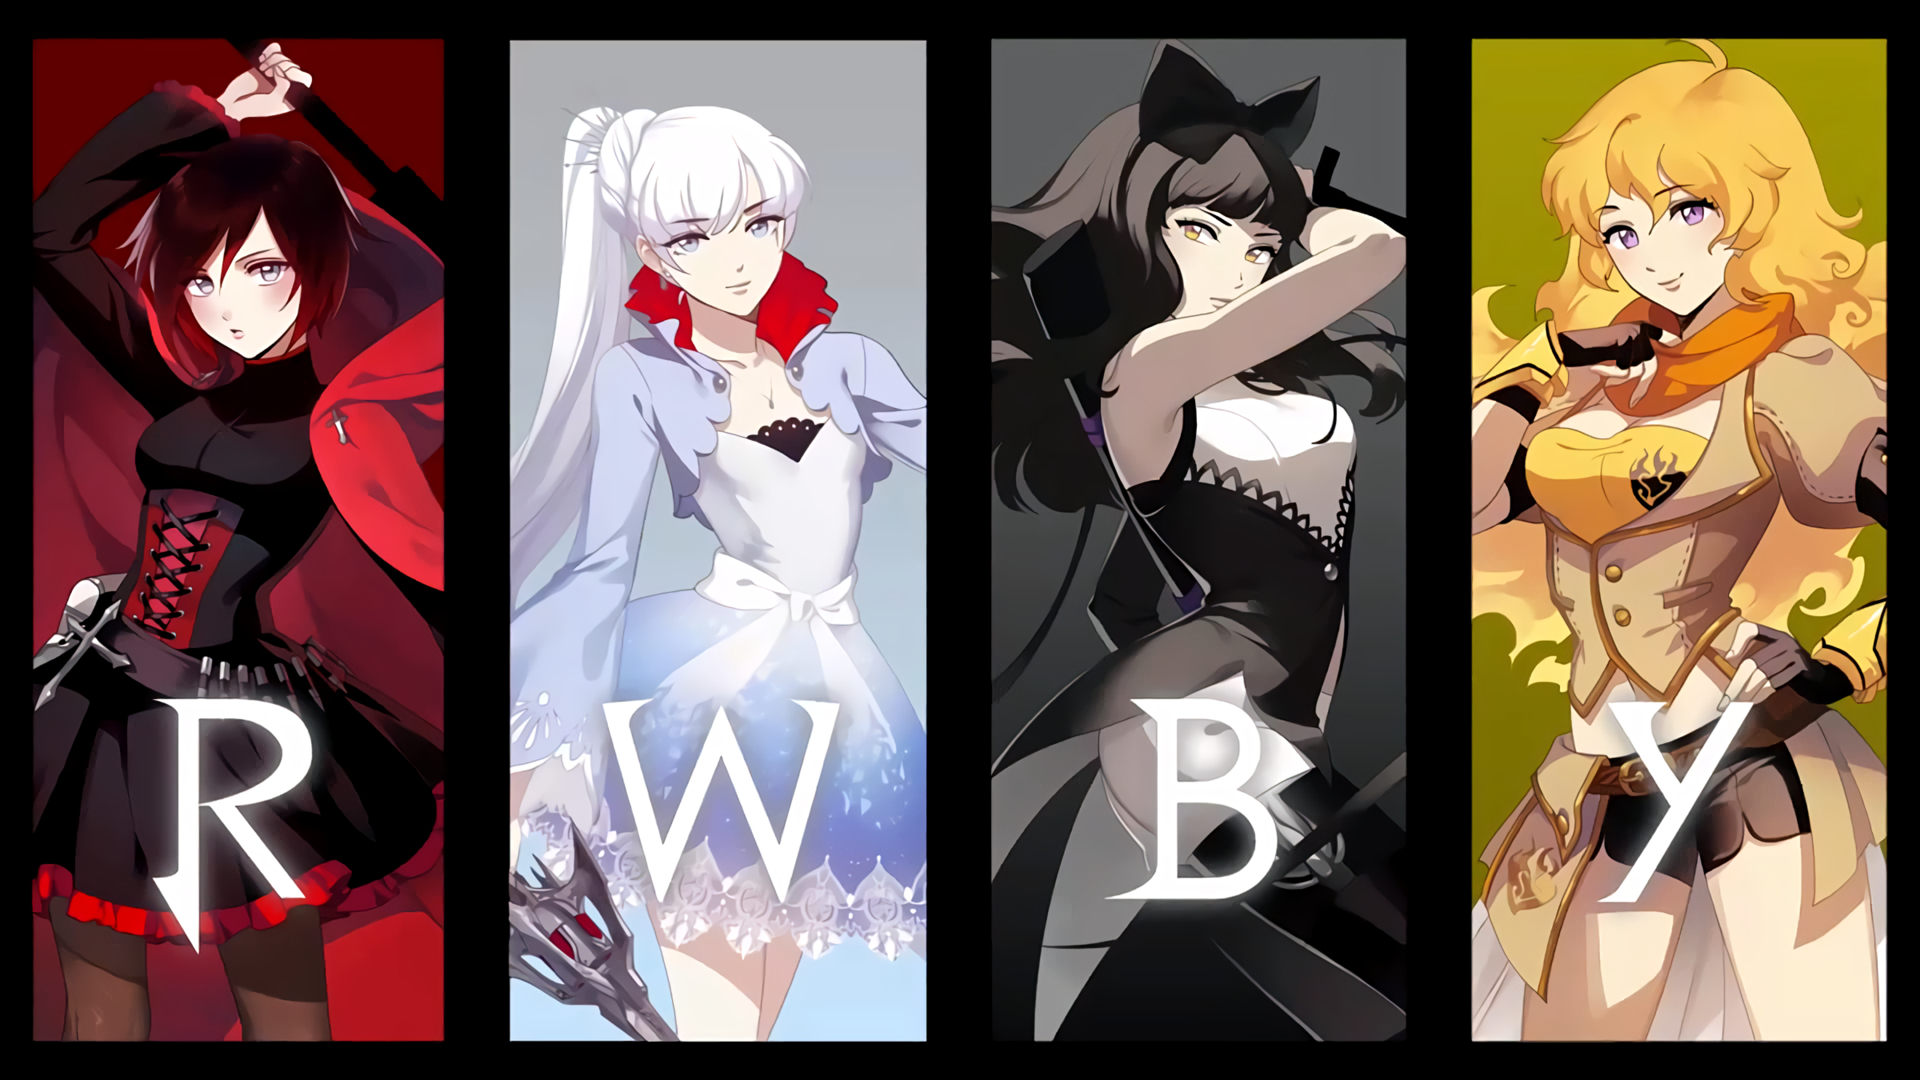 1920x1080 490+ Anime RWBY HD Wallpapers and Backgrounds